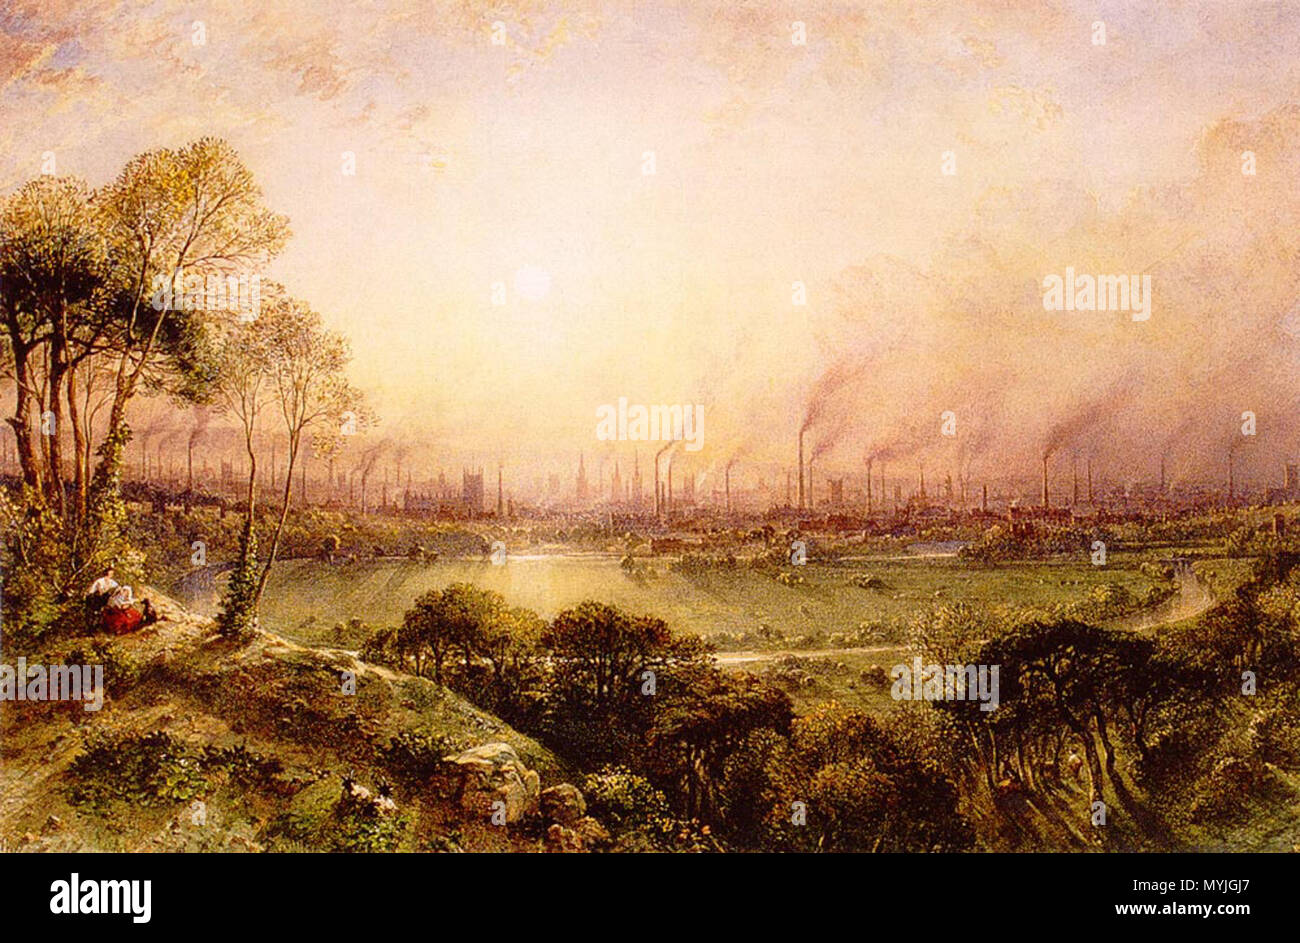 . Manchester from Kersal Moor .  English: Later rendered as an engraving entitled Cottonopolis by Edward Goodall . 1852.    William Wyld  (1806–1889)     Alternative names Wyld  Description British painter  Date of birth/death 17 January 1806 25 December 1889  Location of birth/death Greater London Paris  Work location Paris  Authority control  : Q3569042 VIAF: 66477082 ISNI: 0000 0000 6641 9868 ULAN: 500018763 LCCN: n85221375 NLA: 35803082 WorldCat 341 Manchester from Kersal Moor William Wylde (1857) Stock Photo